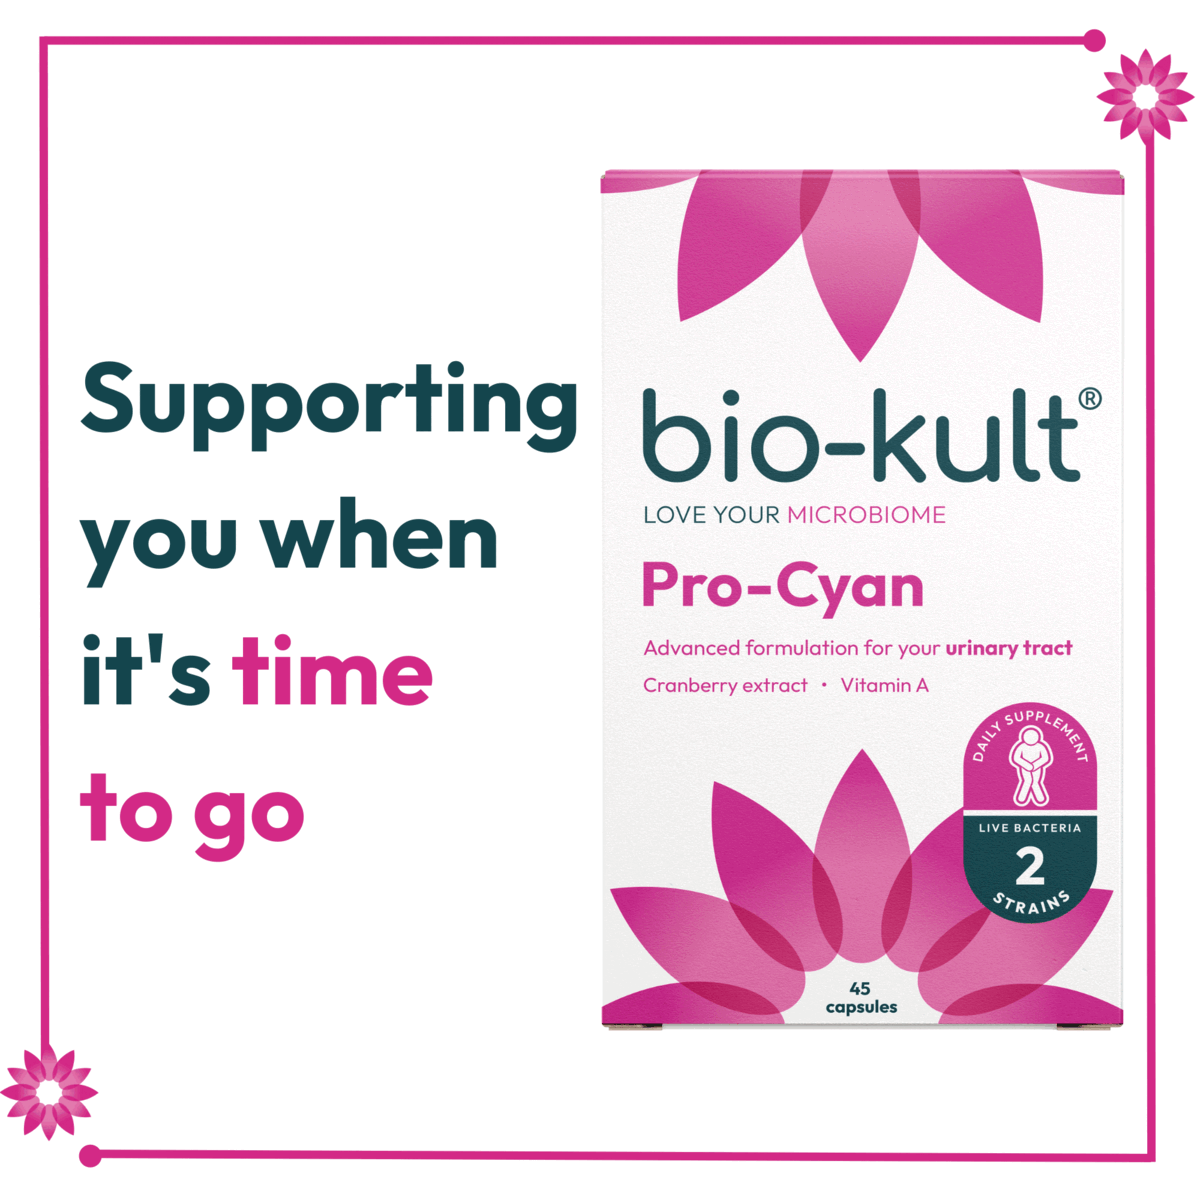 Supporting bio-kult 
              you when is time to go, the little flower with a whole lot of power, new look some award winning bacteria inside!higly recommended - life saver, fantastic - i just can't believe it, great product, we can't hold in our exictment!